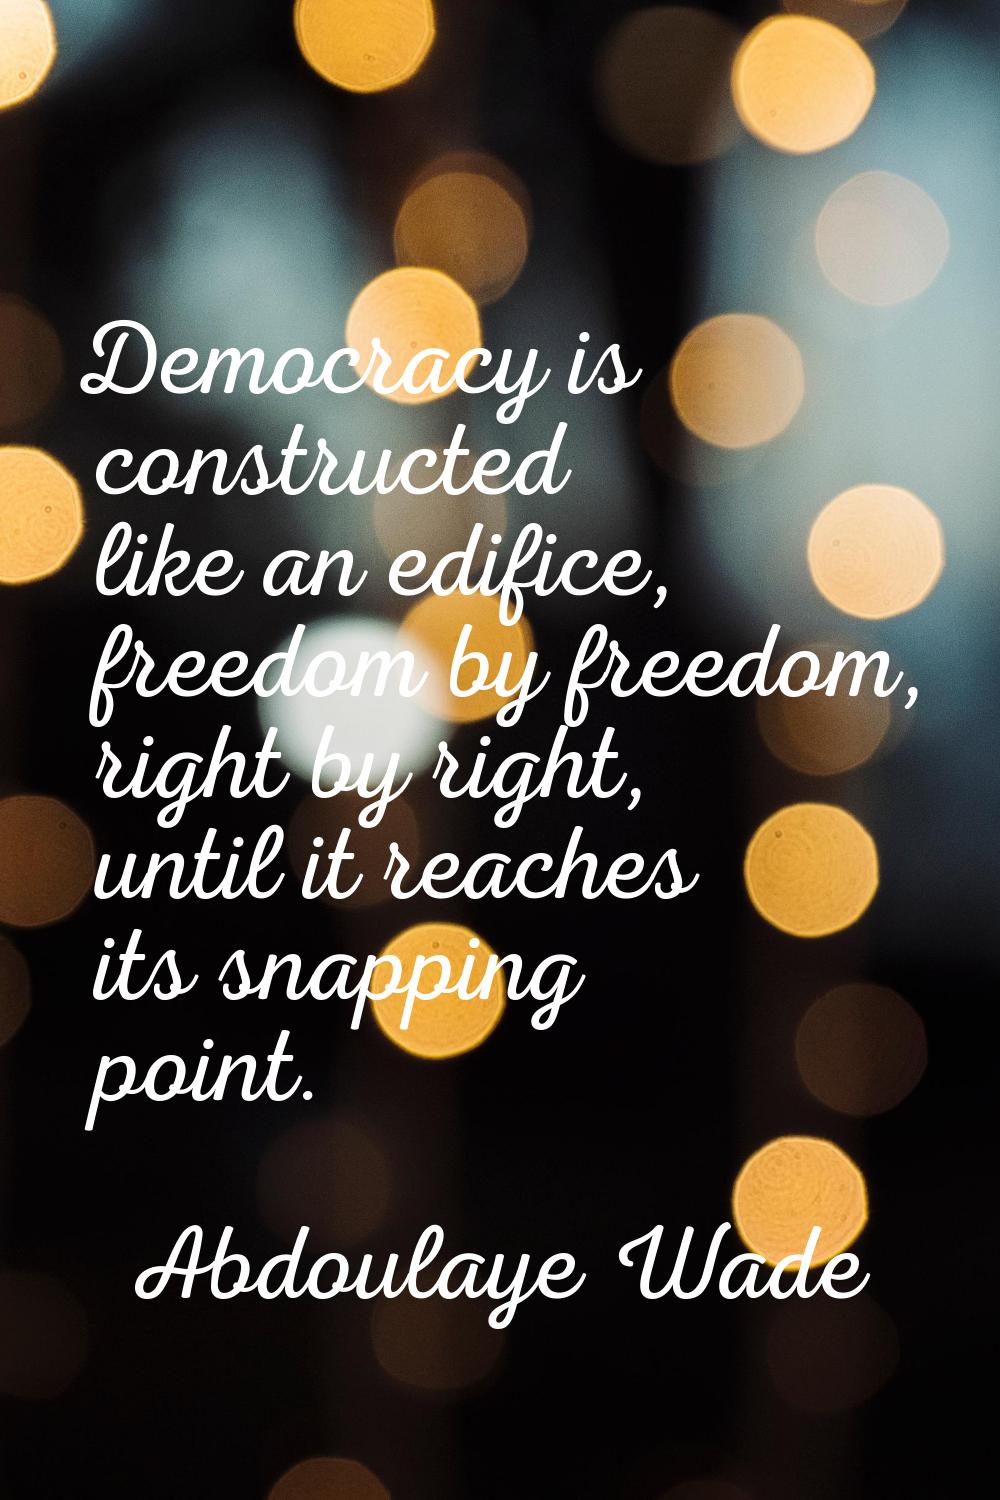 Democracy is constructed like an edifice, freedom by freedom, right by right, until it reaches its 